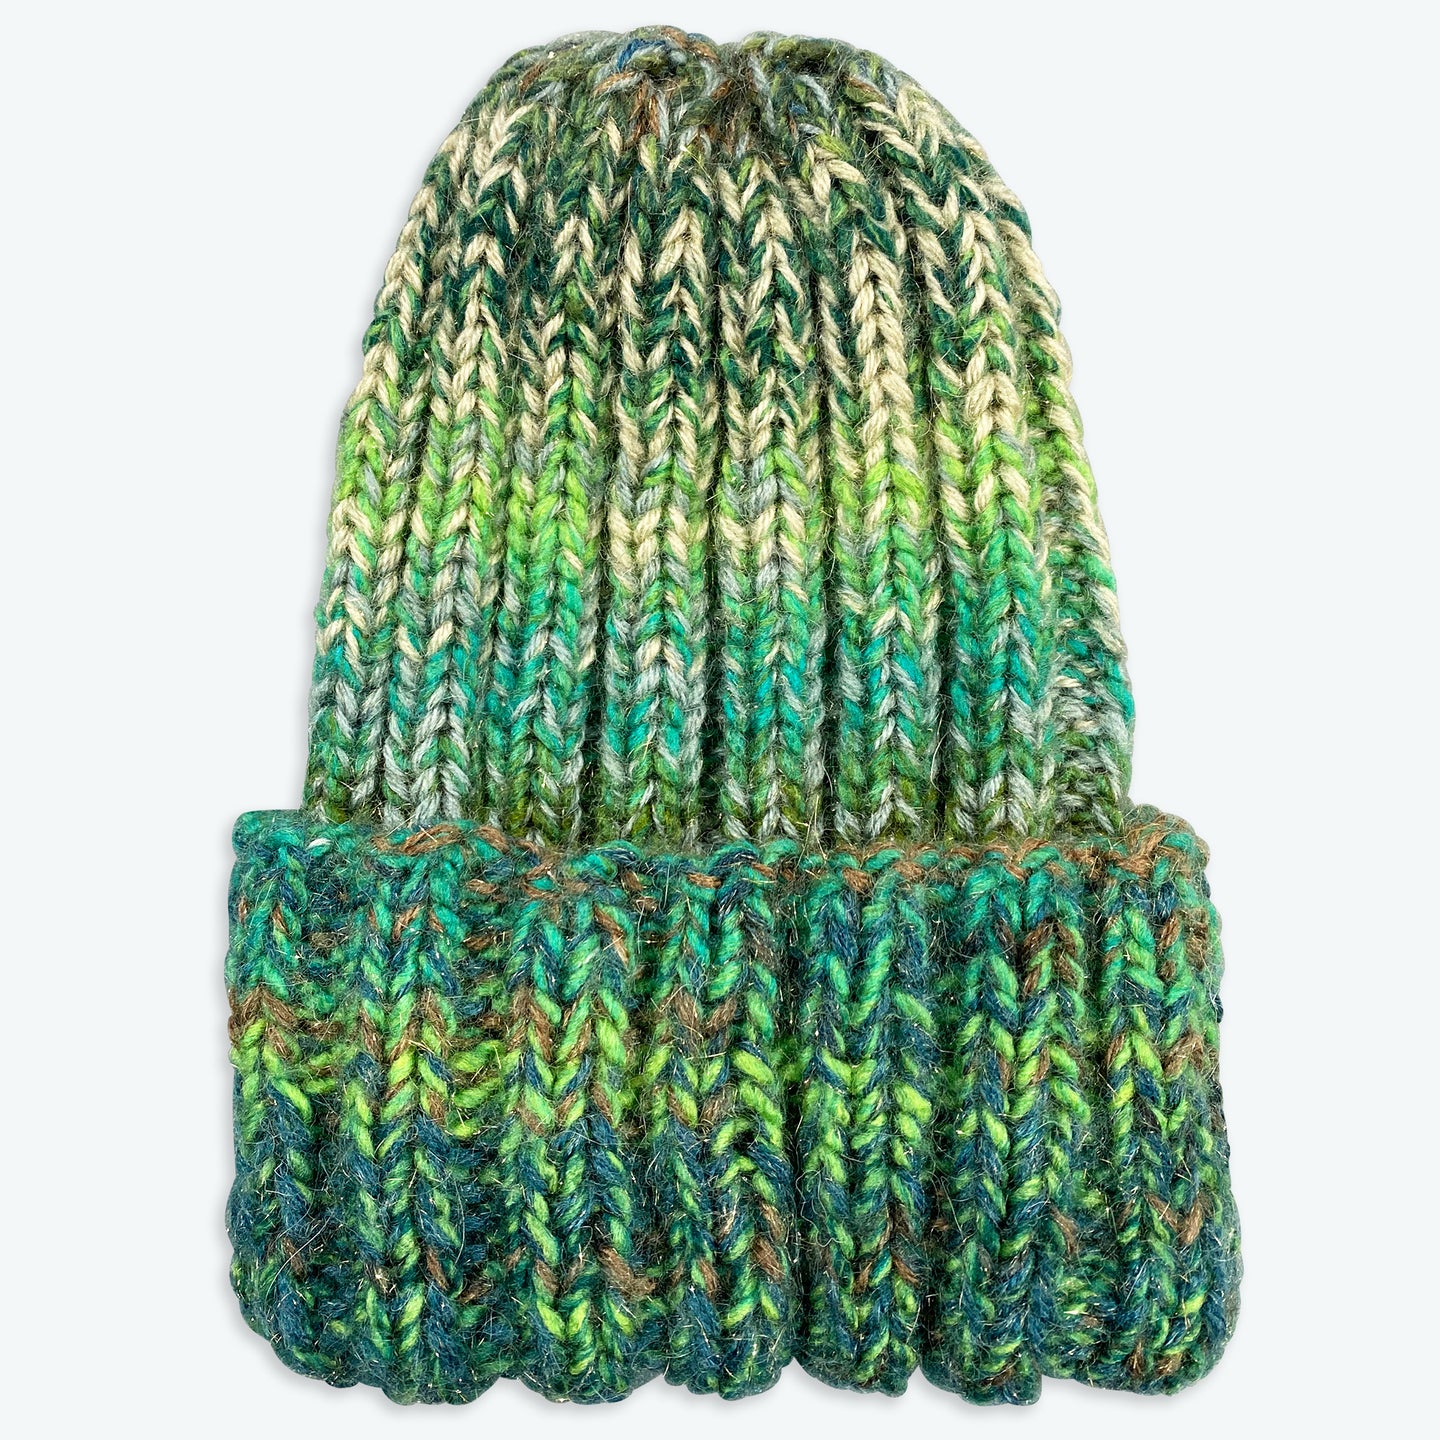 Hand Knitted Vintage Beanie (Green Mix)